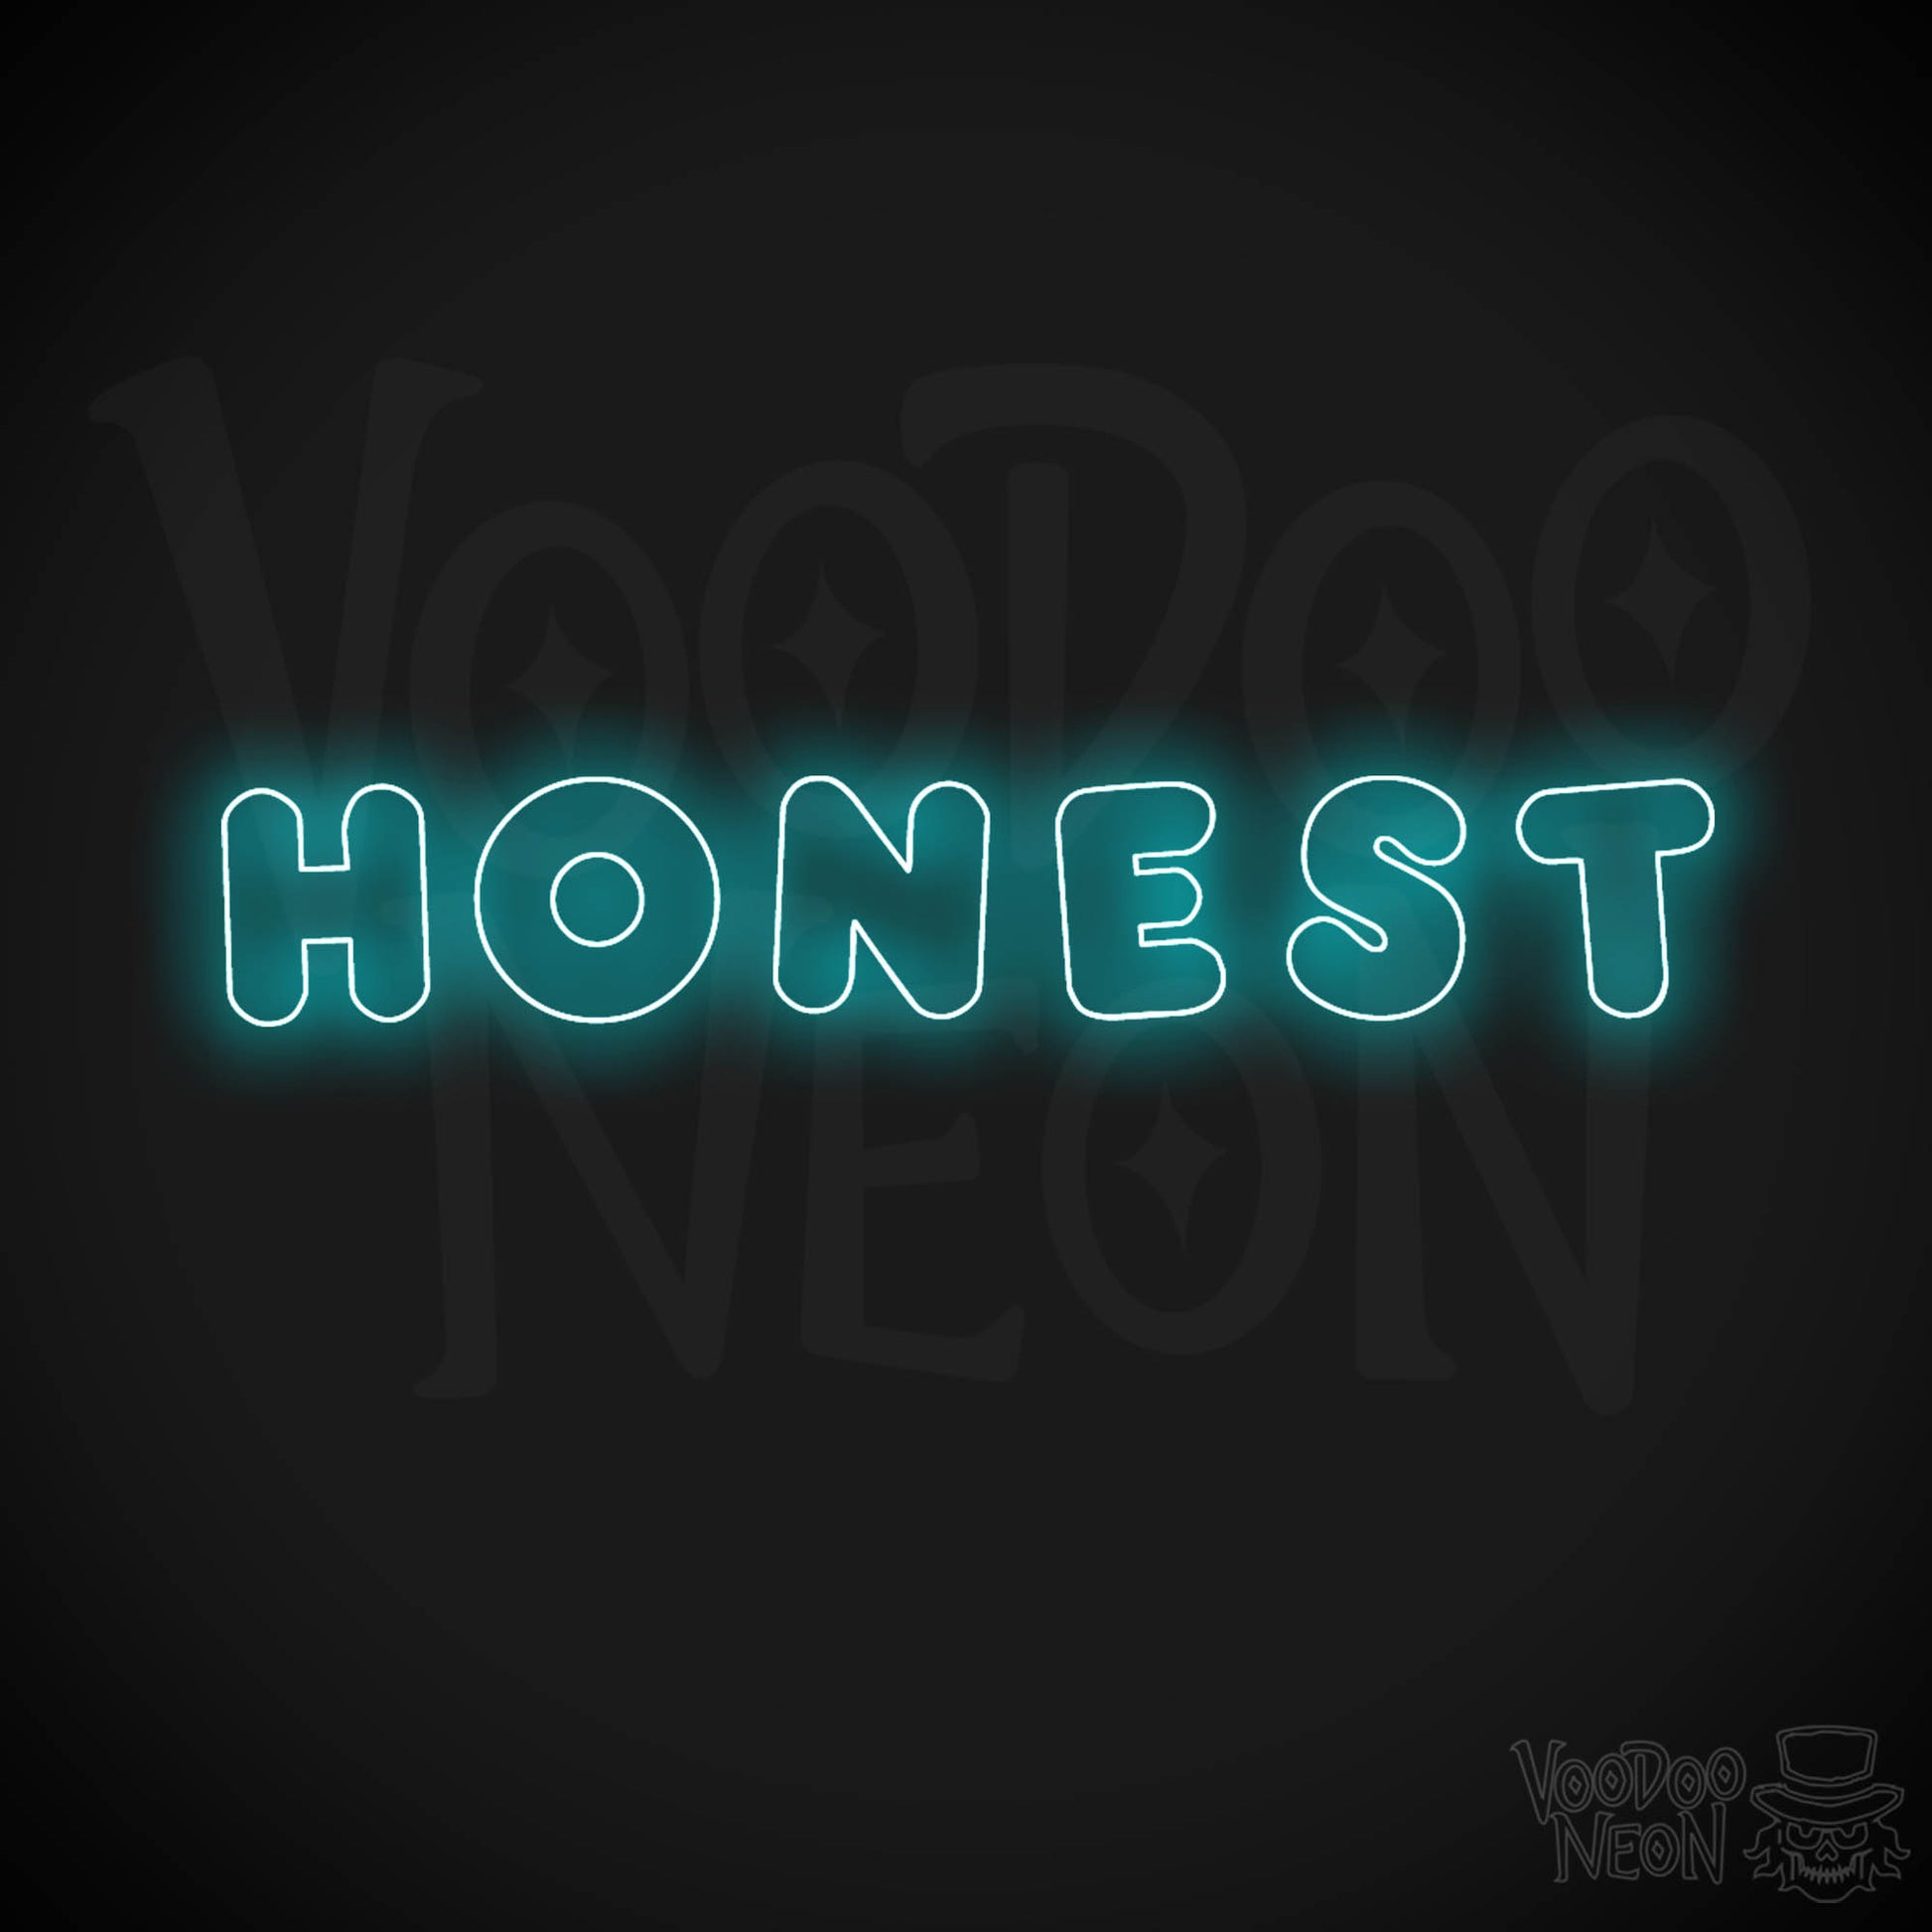 Honest Neon Sign - Neon Honest Sign - LED Neon Wall Art - Color Ice Blue